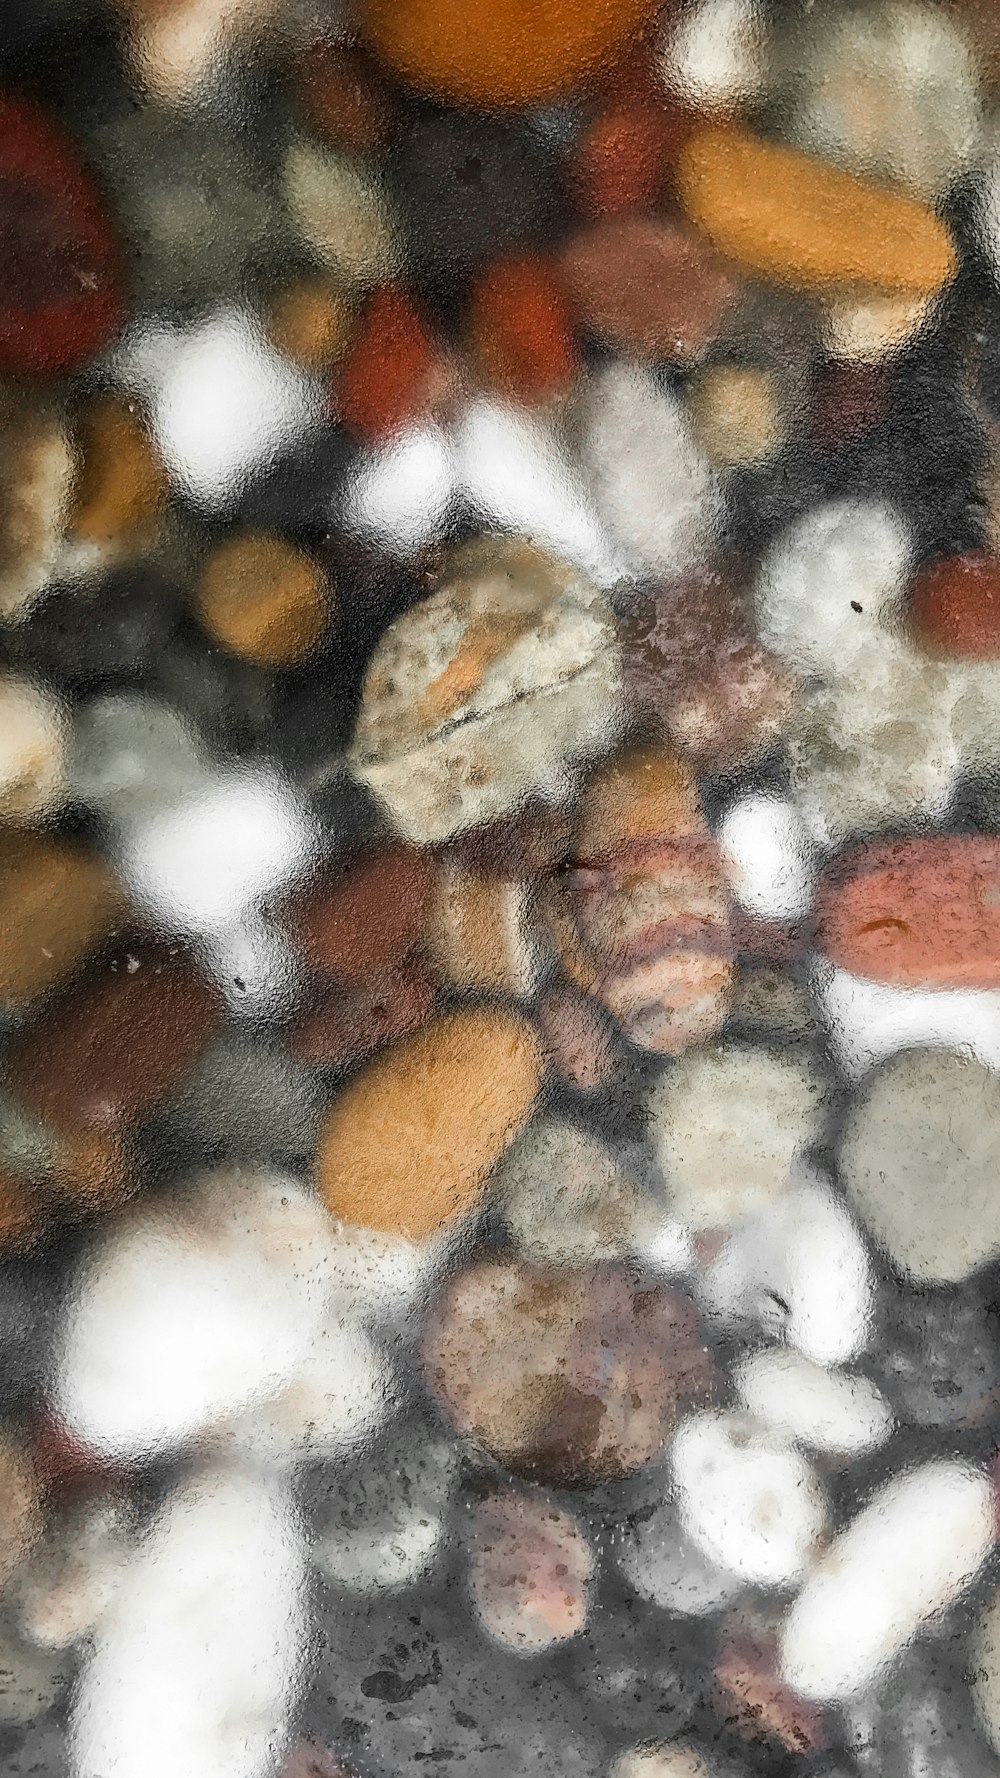 a close up of rocks and pebbles under water